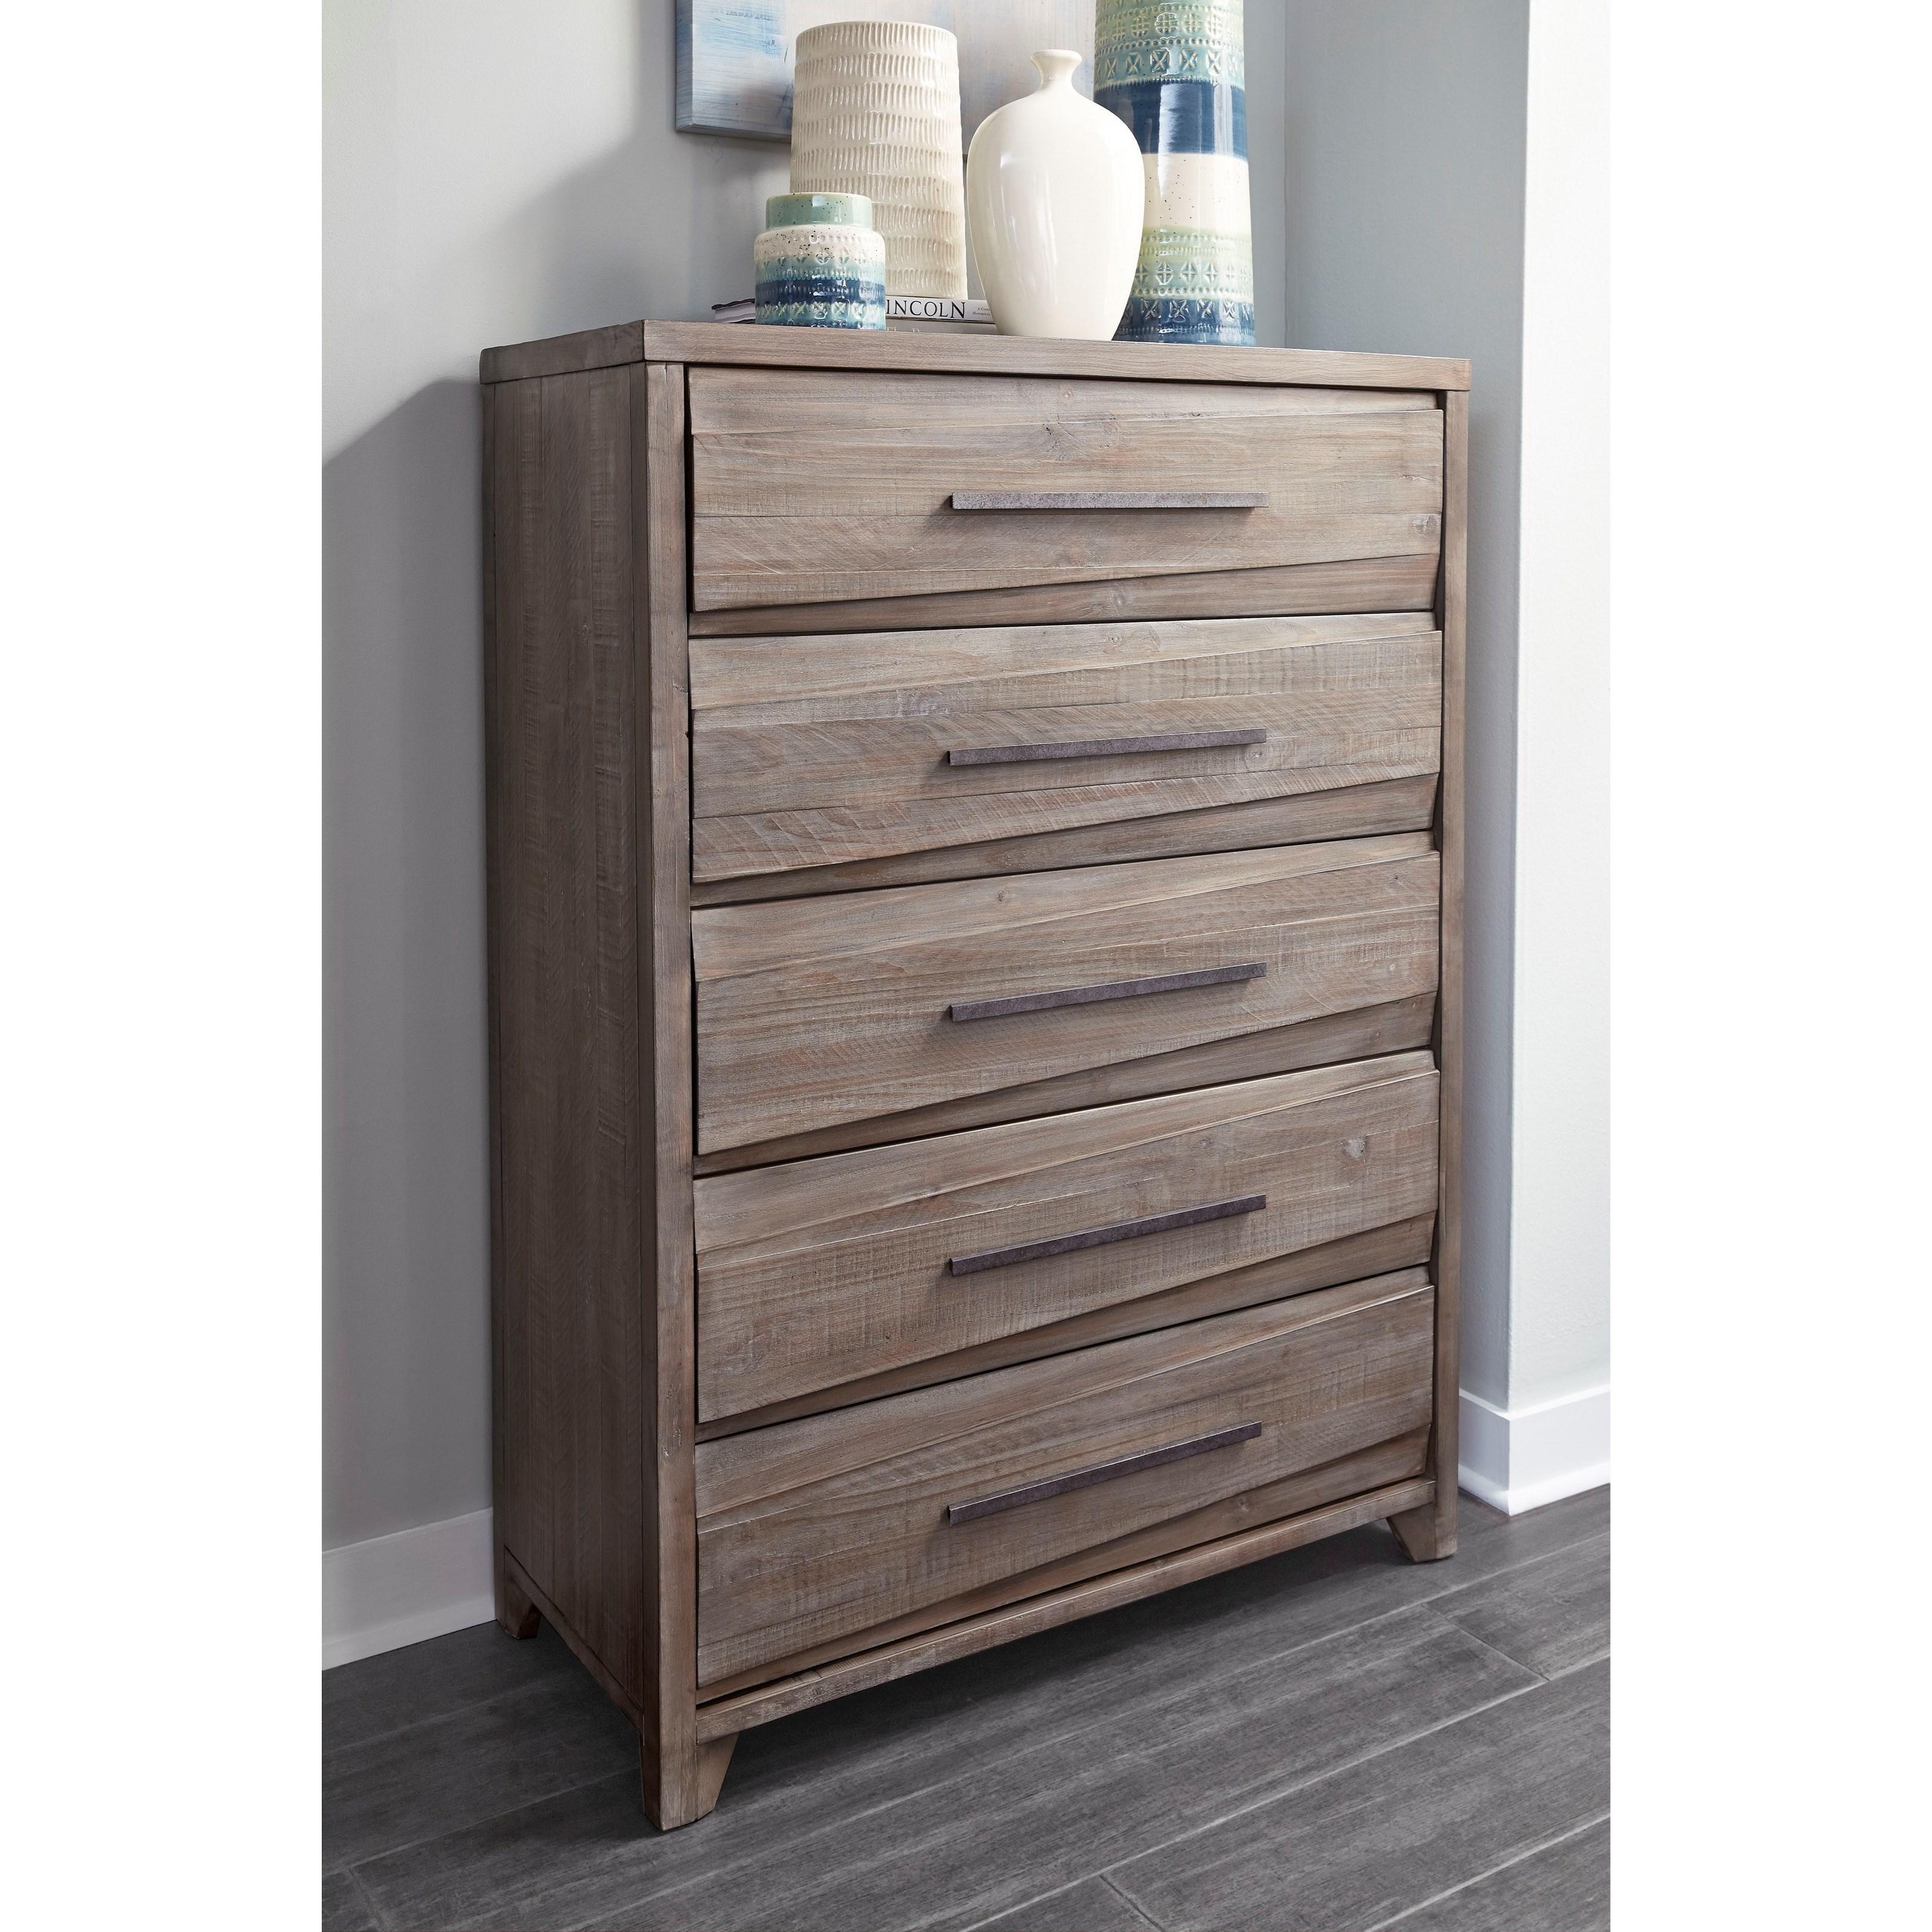 

    
Rustic Style Sahara Tan Finish 5-Drawer Chest HEARST by Modus Furniture
